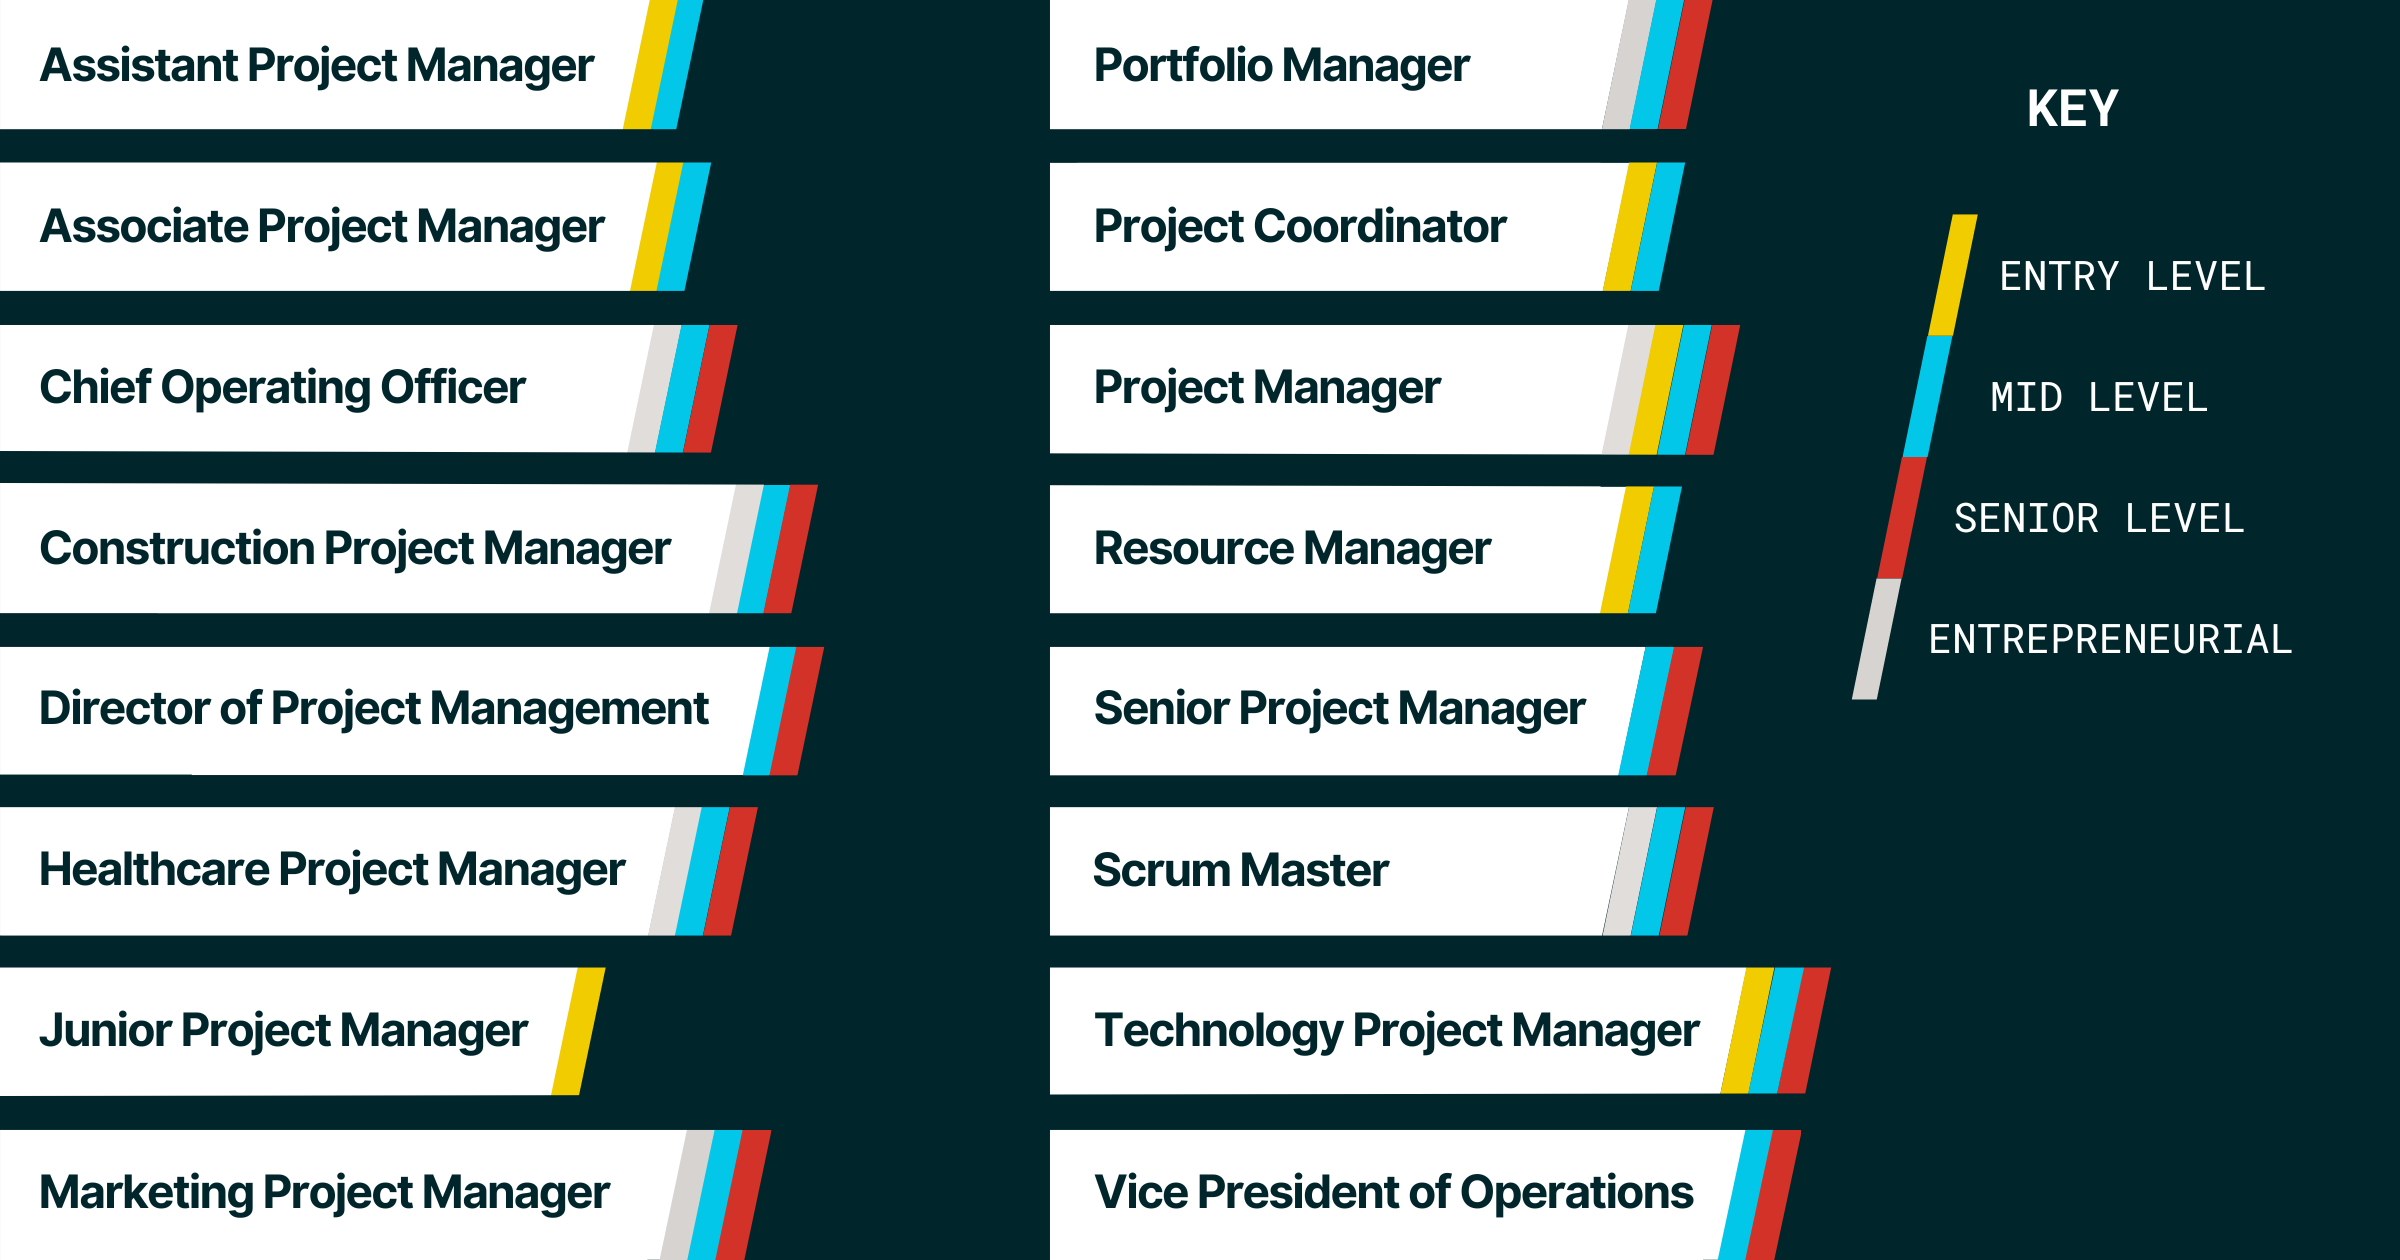 A graphic visualizing 16 roles that call for a project management skill set, alongside categorizations indicating the required expertise level for each role.